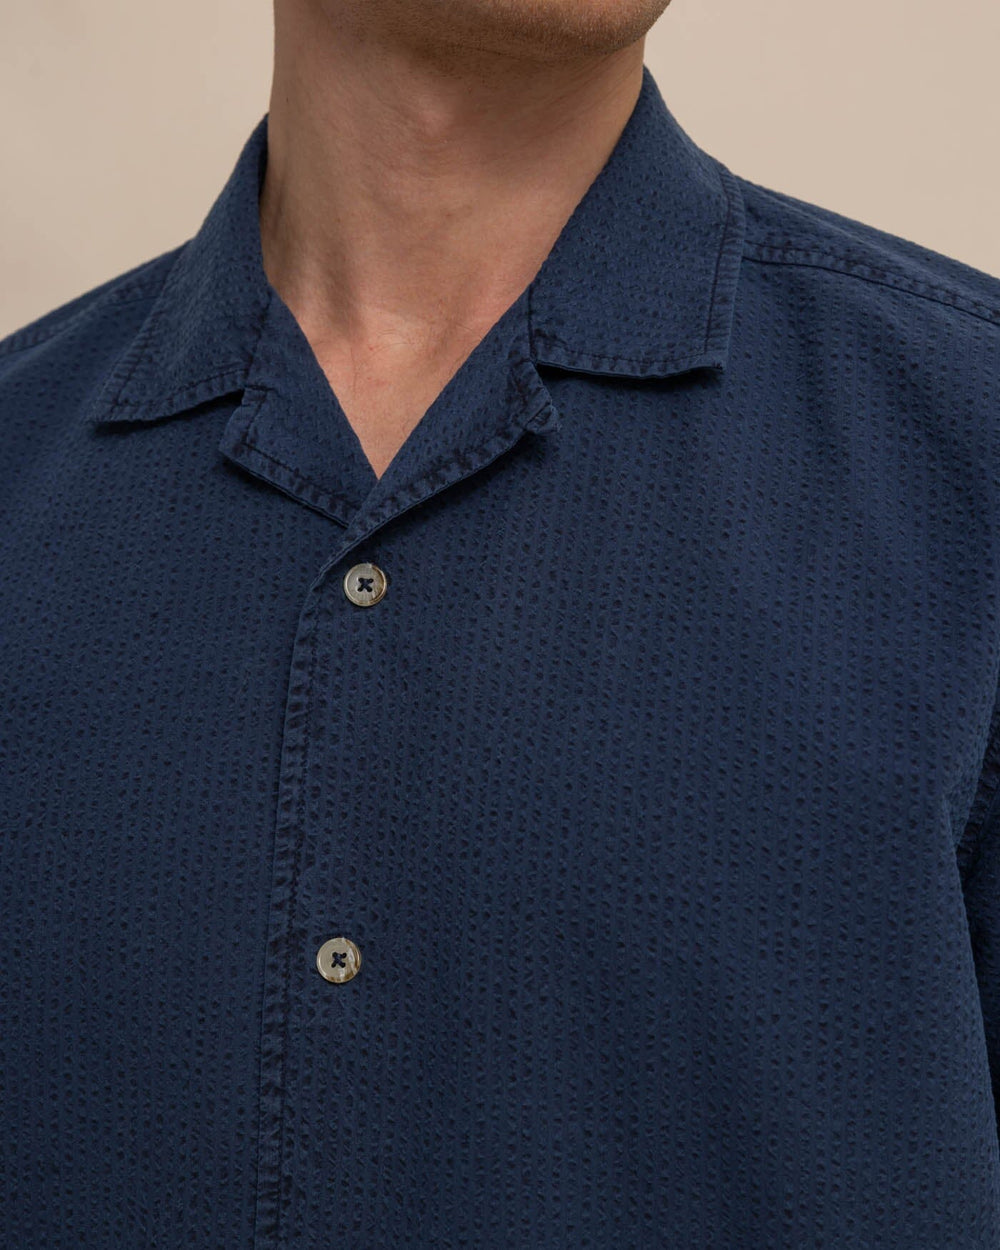 The detail view of the Southern Tide Sun Washed Seerscuker Camp Short Sleeve Sport Shirt by Southern Tide - Dress Blue